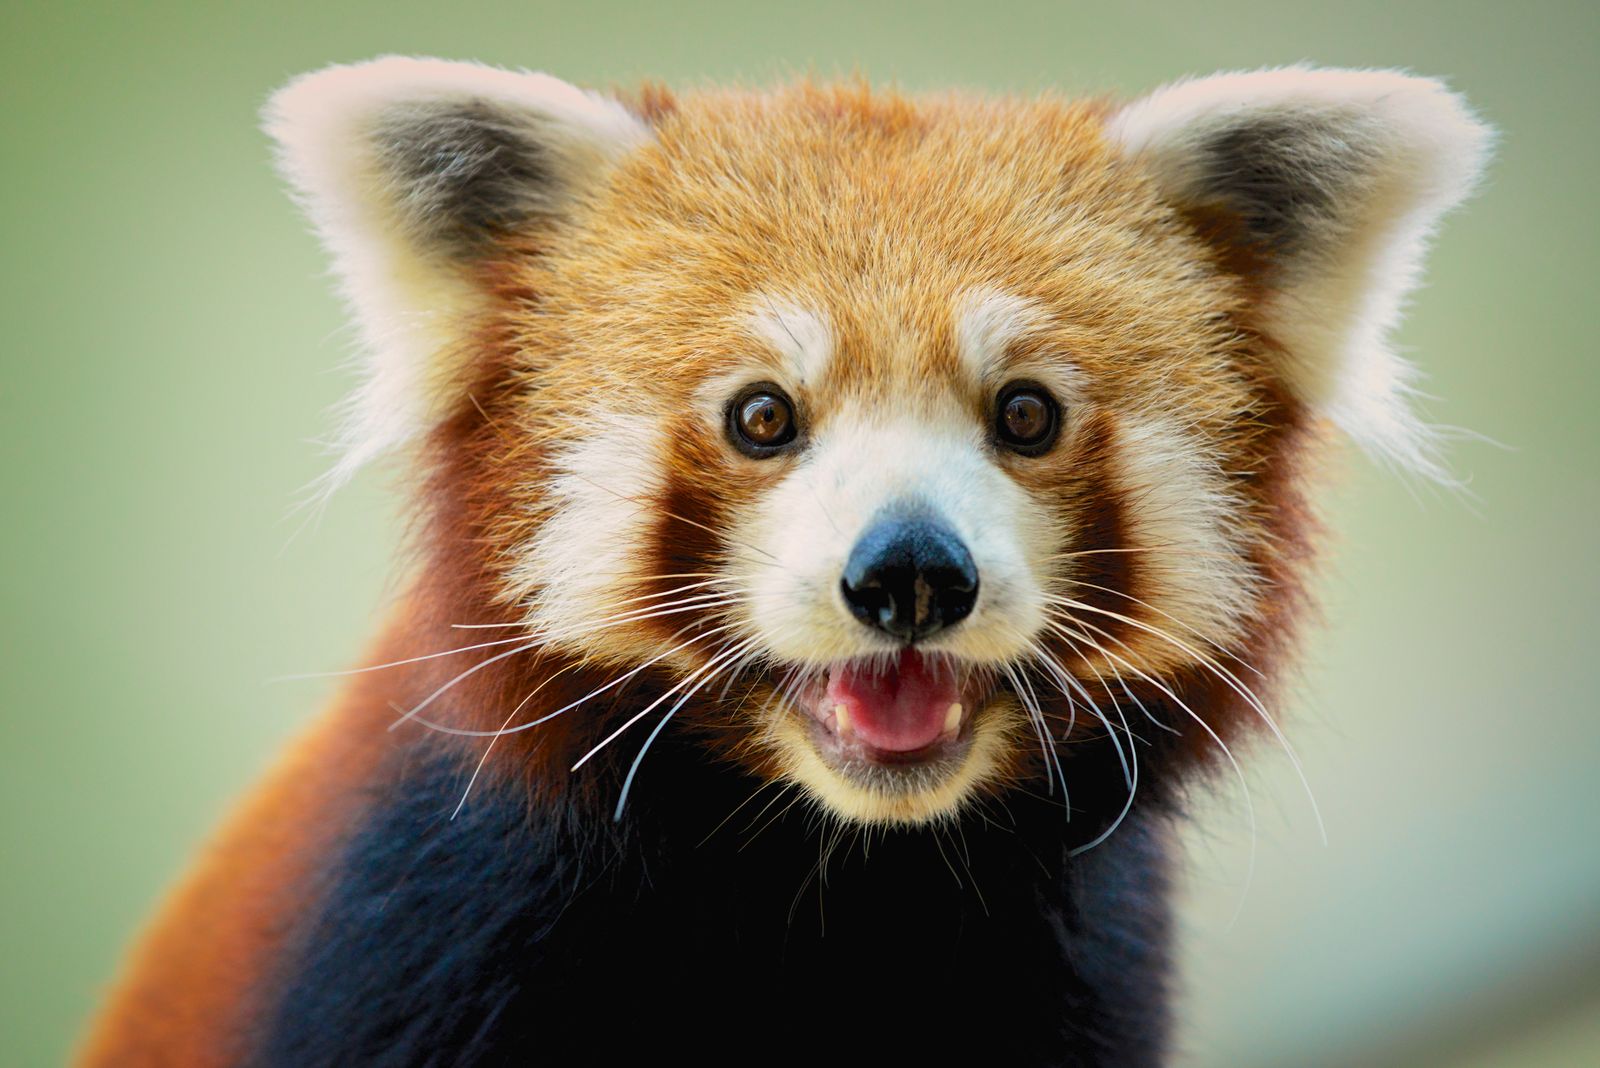 Engager Grine Brudgom Eight Amazing Red Panda Facts | Science| Smithsonian Magazine